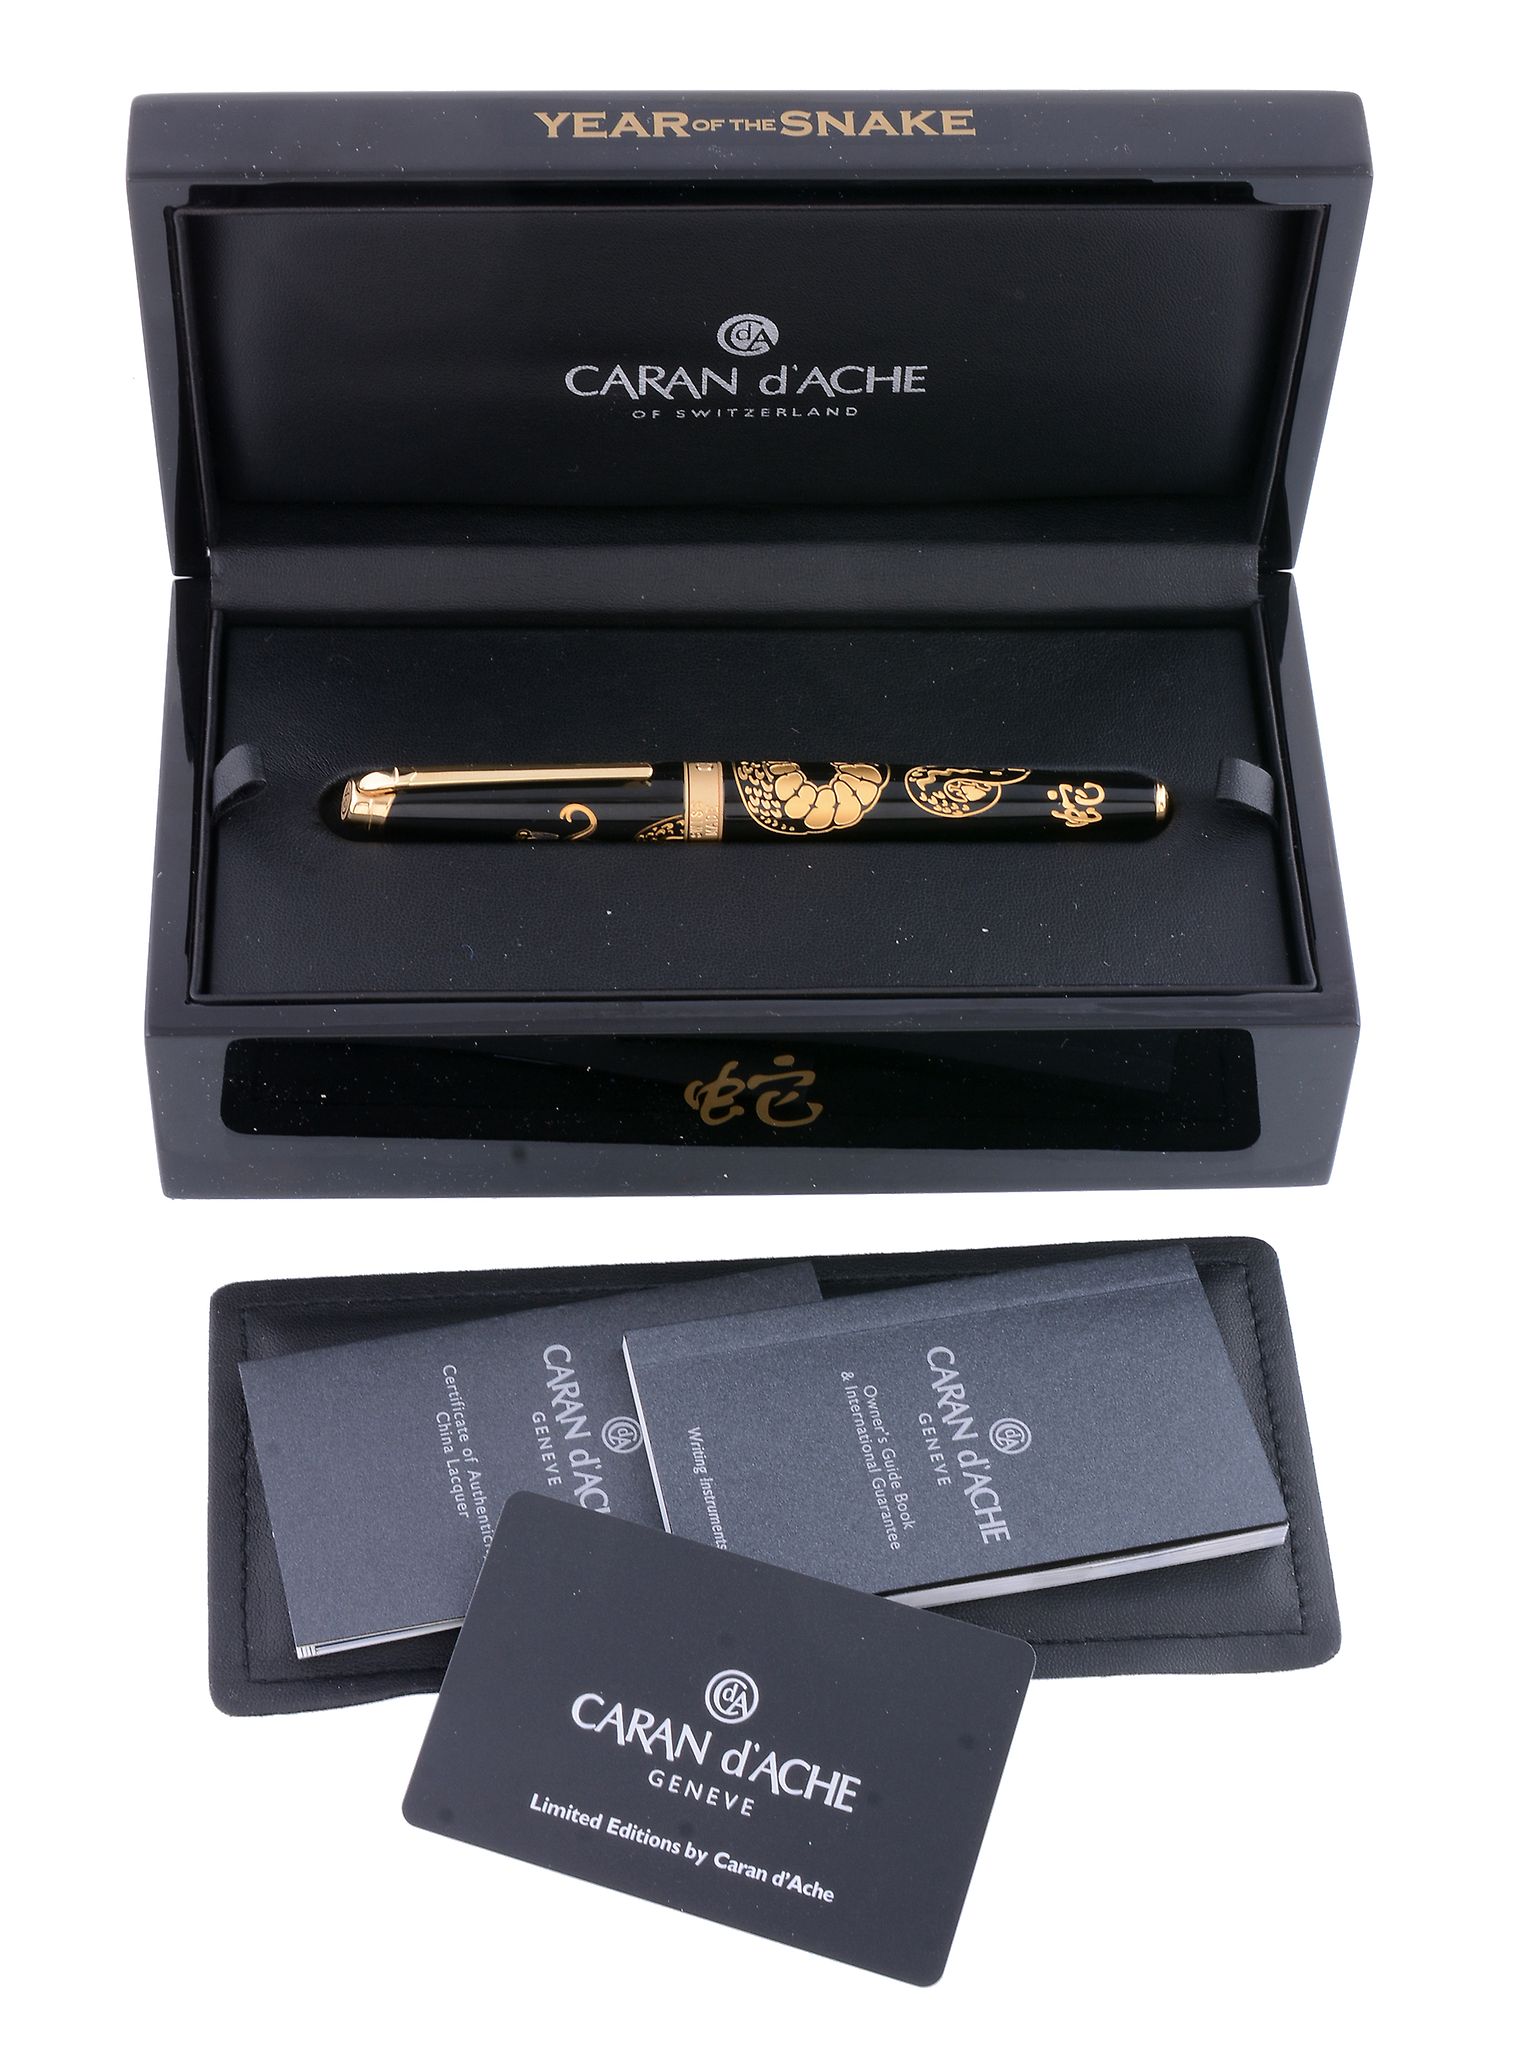 Caran d¬he, Year of The Snake, a limited edition fountain pen,   the black lacquer cap and barrel - Image 2 of 4